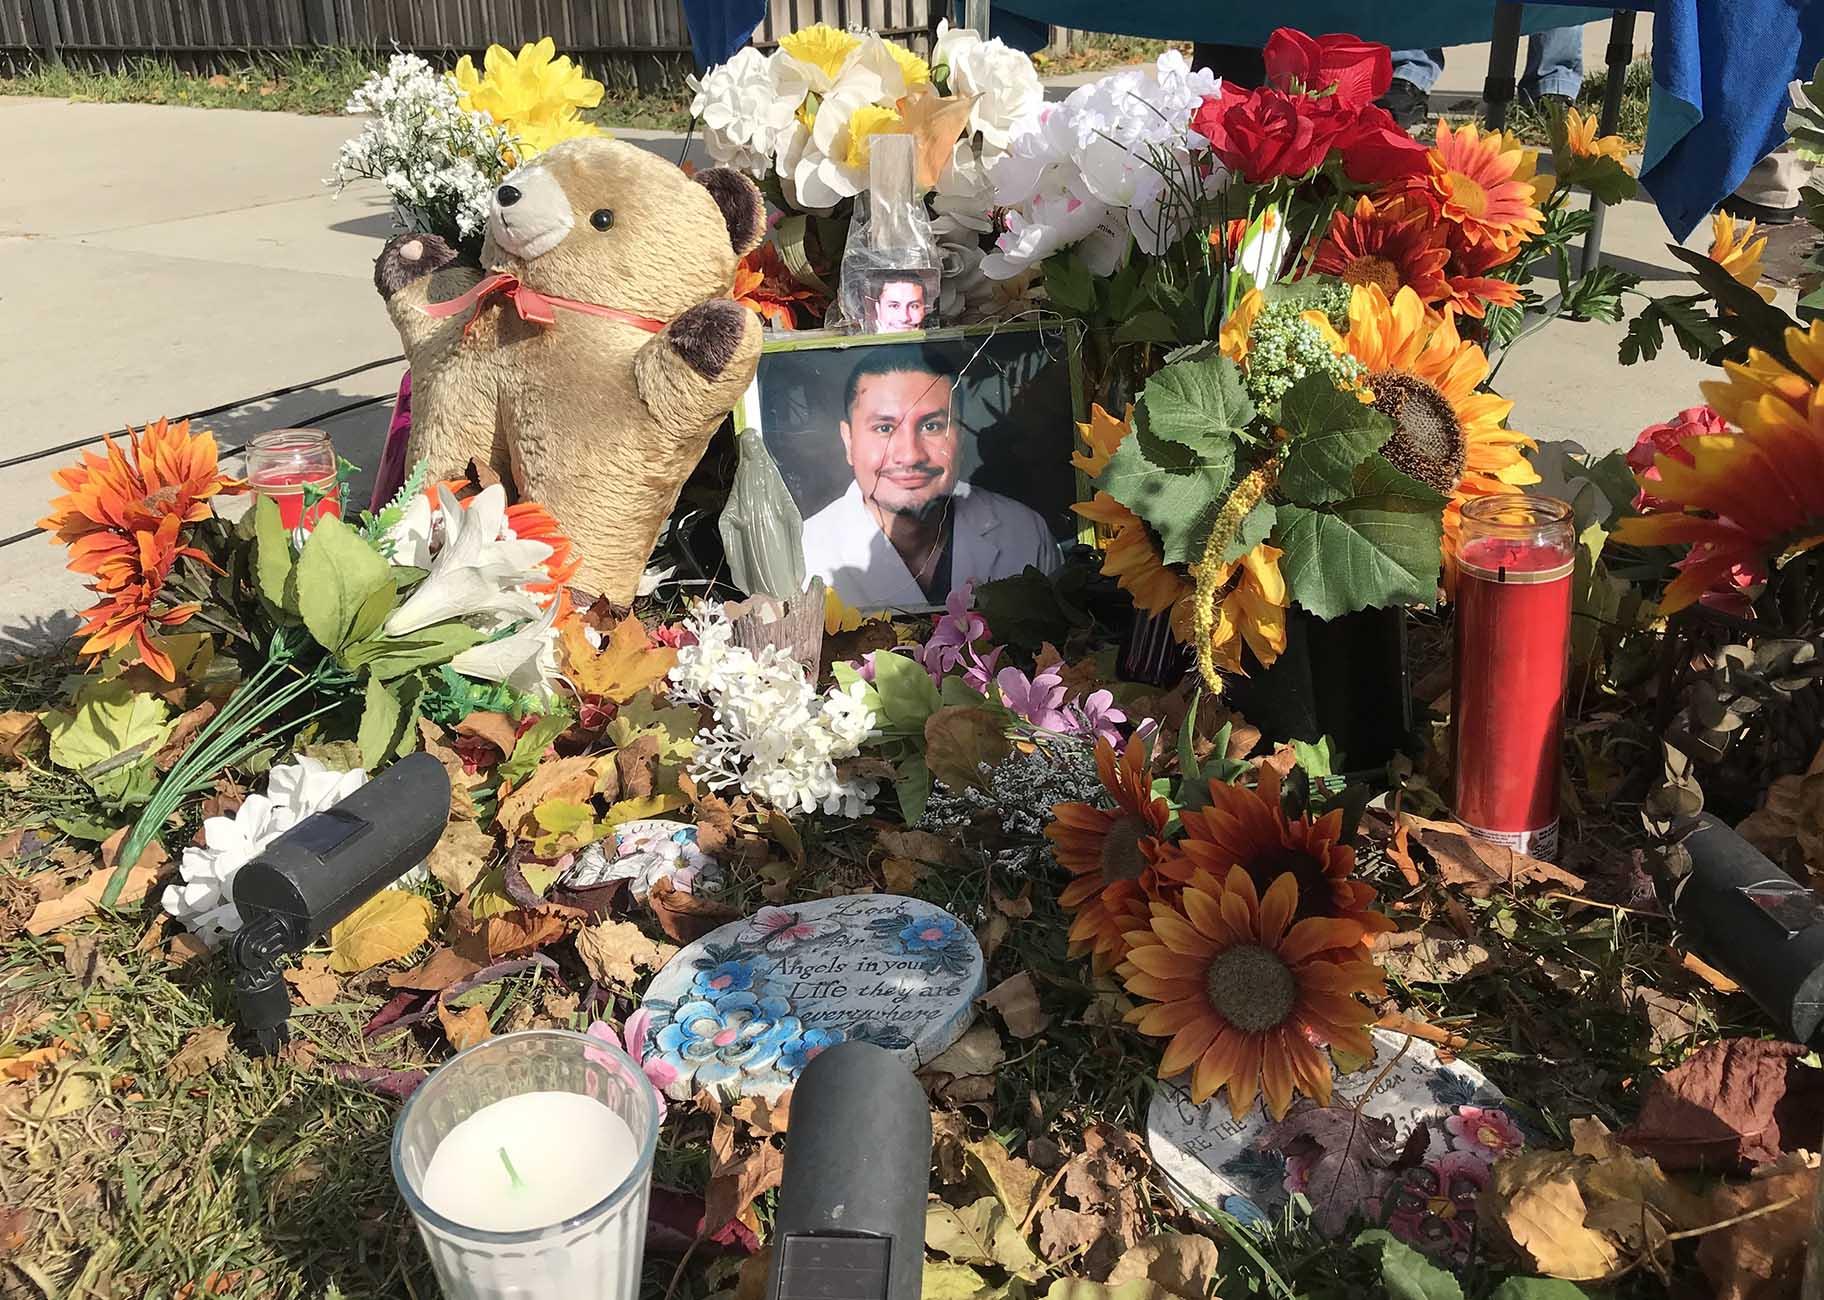 The family of Frank Aguilar added new flowers and a new photo to his memorial at the corner of South Hamlin and West 32nd Street to honor his life on Sunday, Nov. 1, 2020, the eve of Day of the Dead. (Ariel Parrella-Aureli / WTTW News)